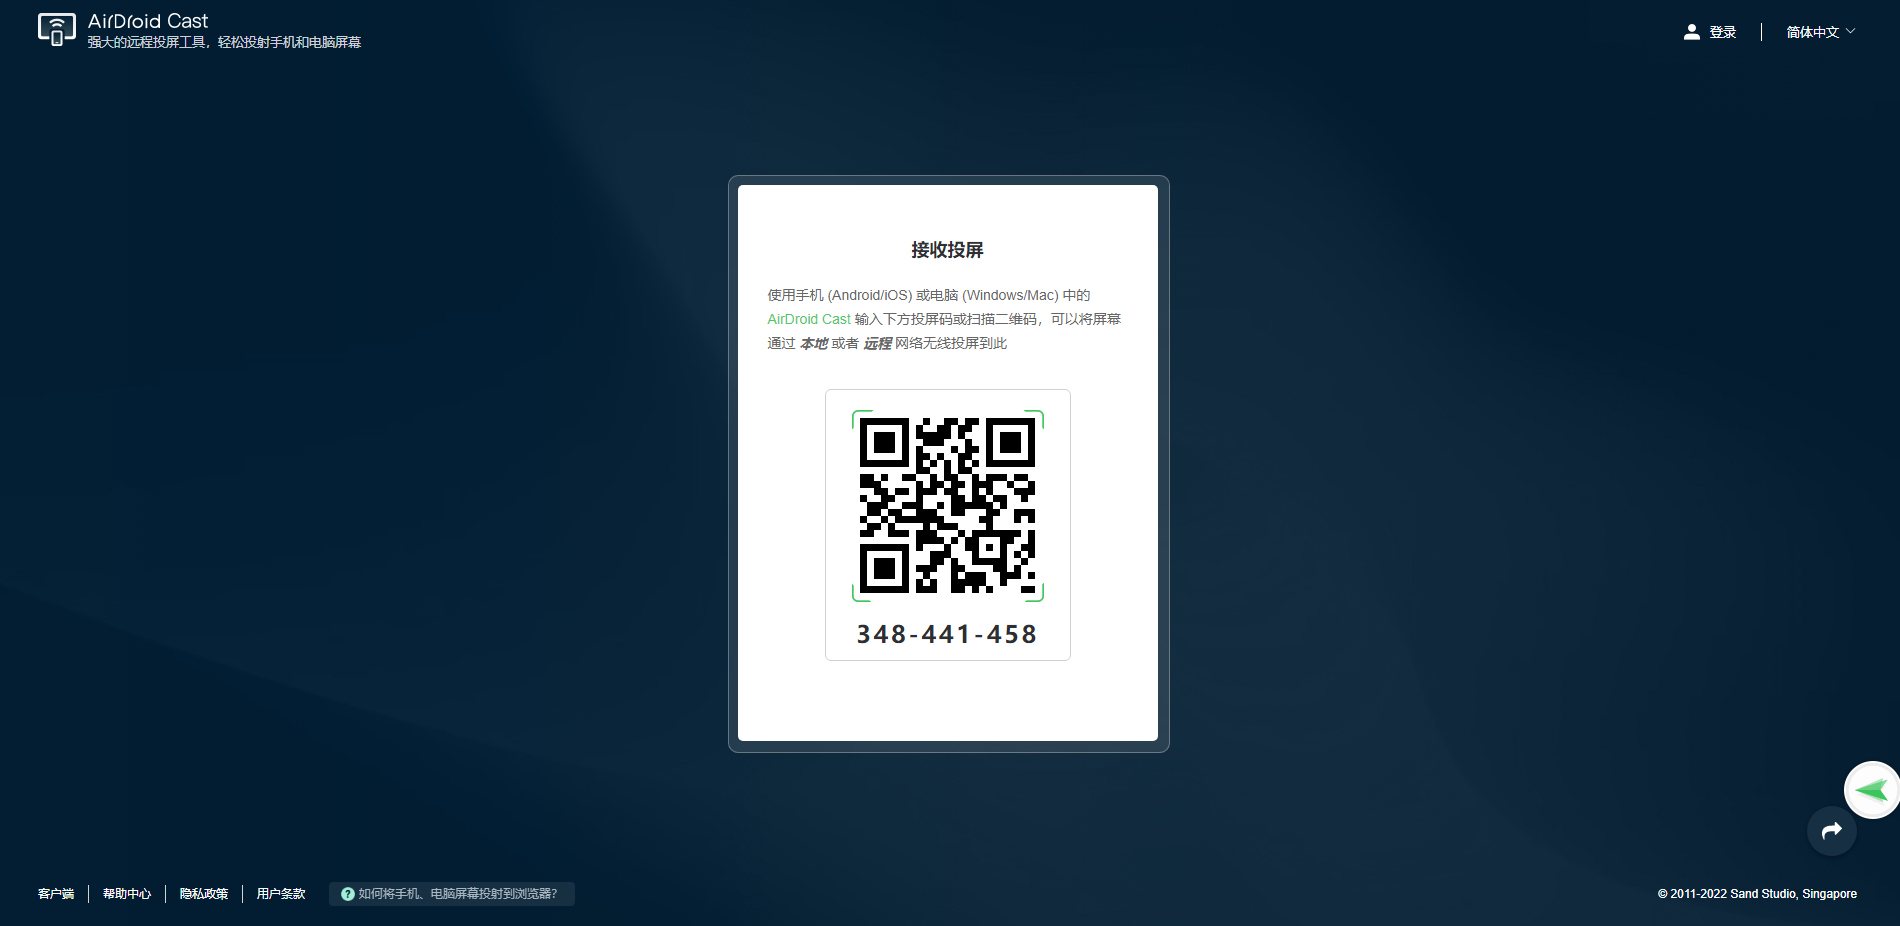 AirDroid Cast网页版